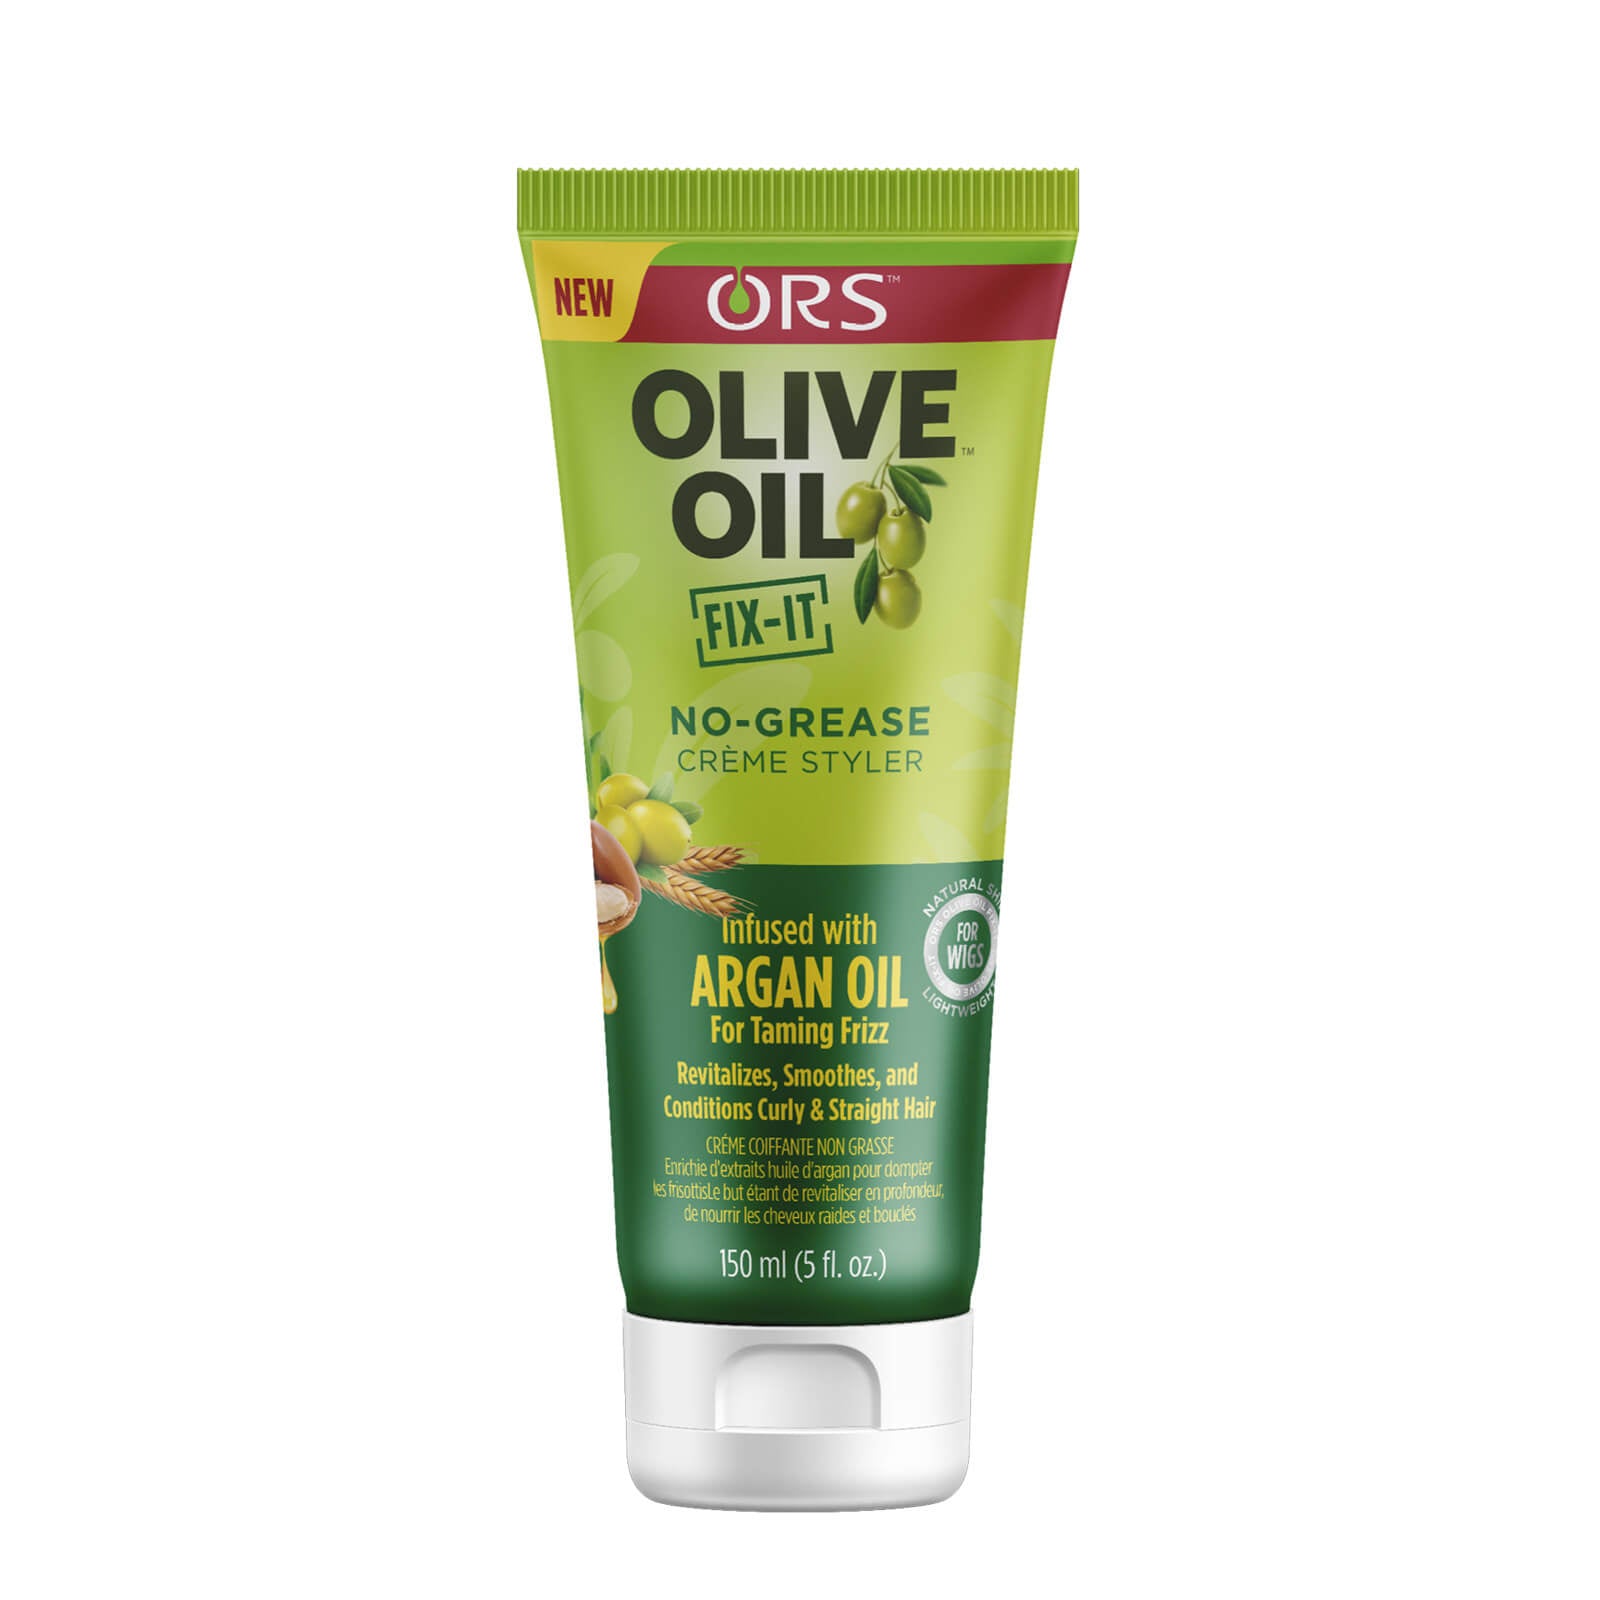 ORS Olive Oil- Fix It No-Grease Creme Styler 5oz